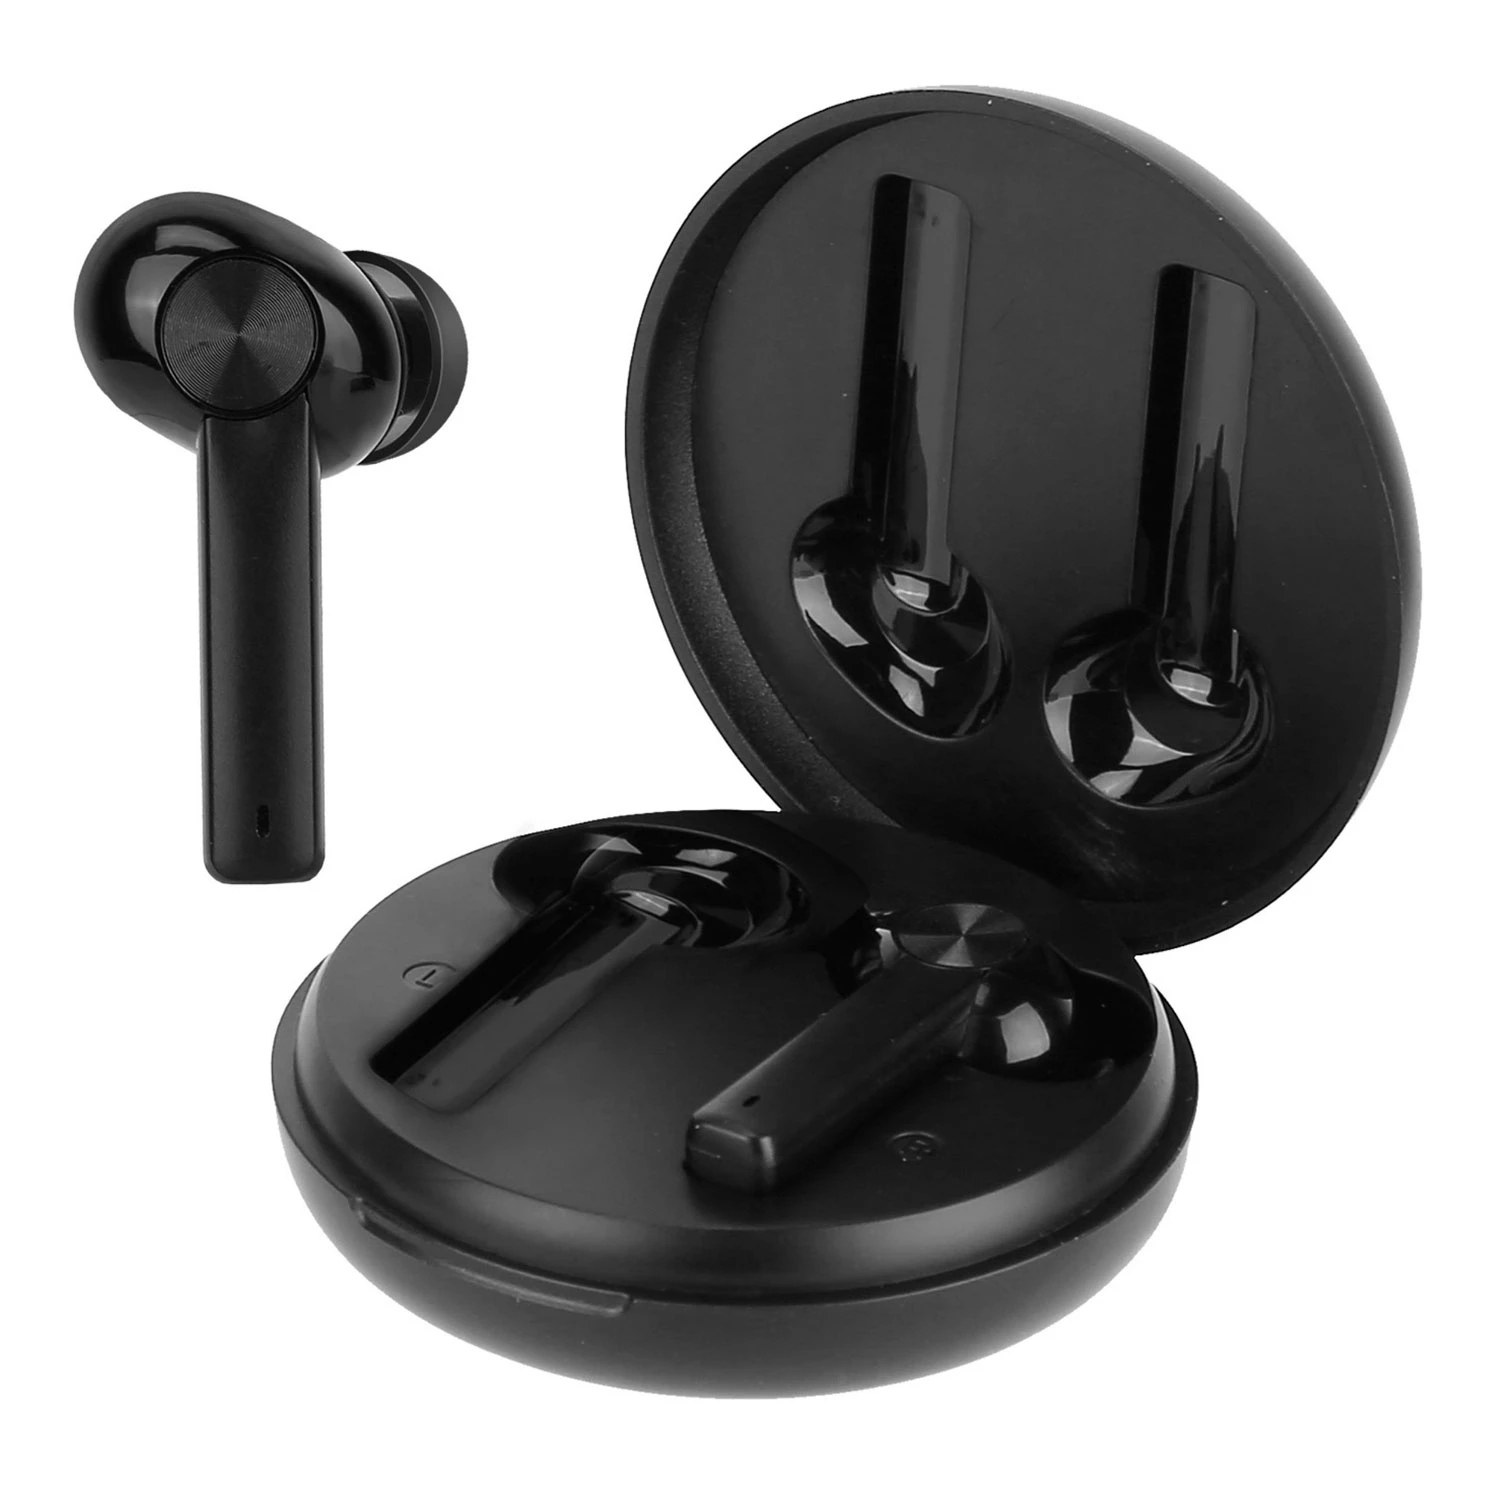 5.0 TWS Wireless Earbuds with CVC6.0 Noise Canceling, LED Screen, Touch Control